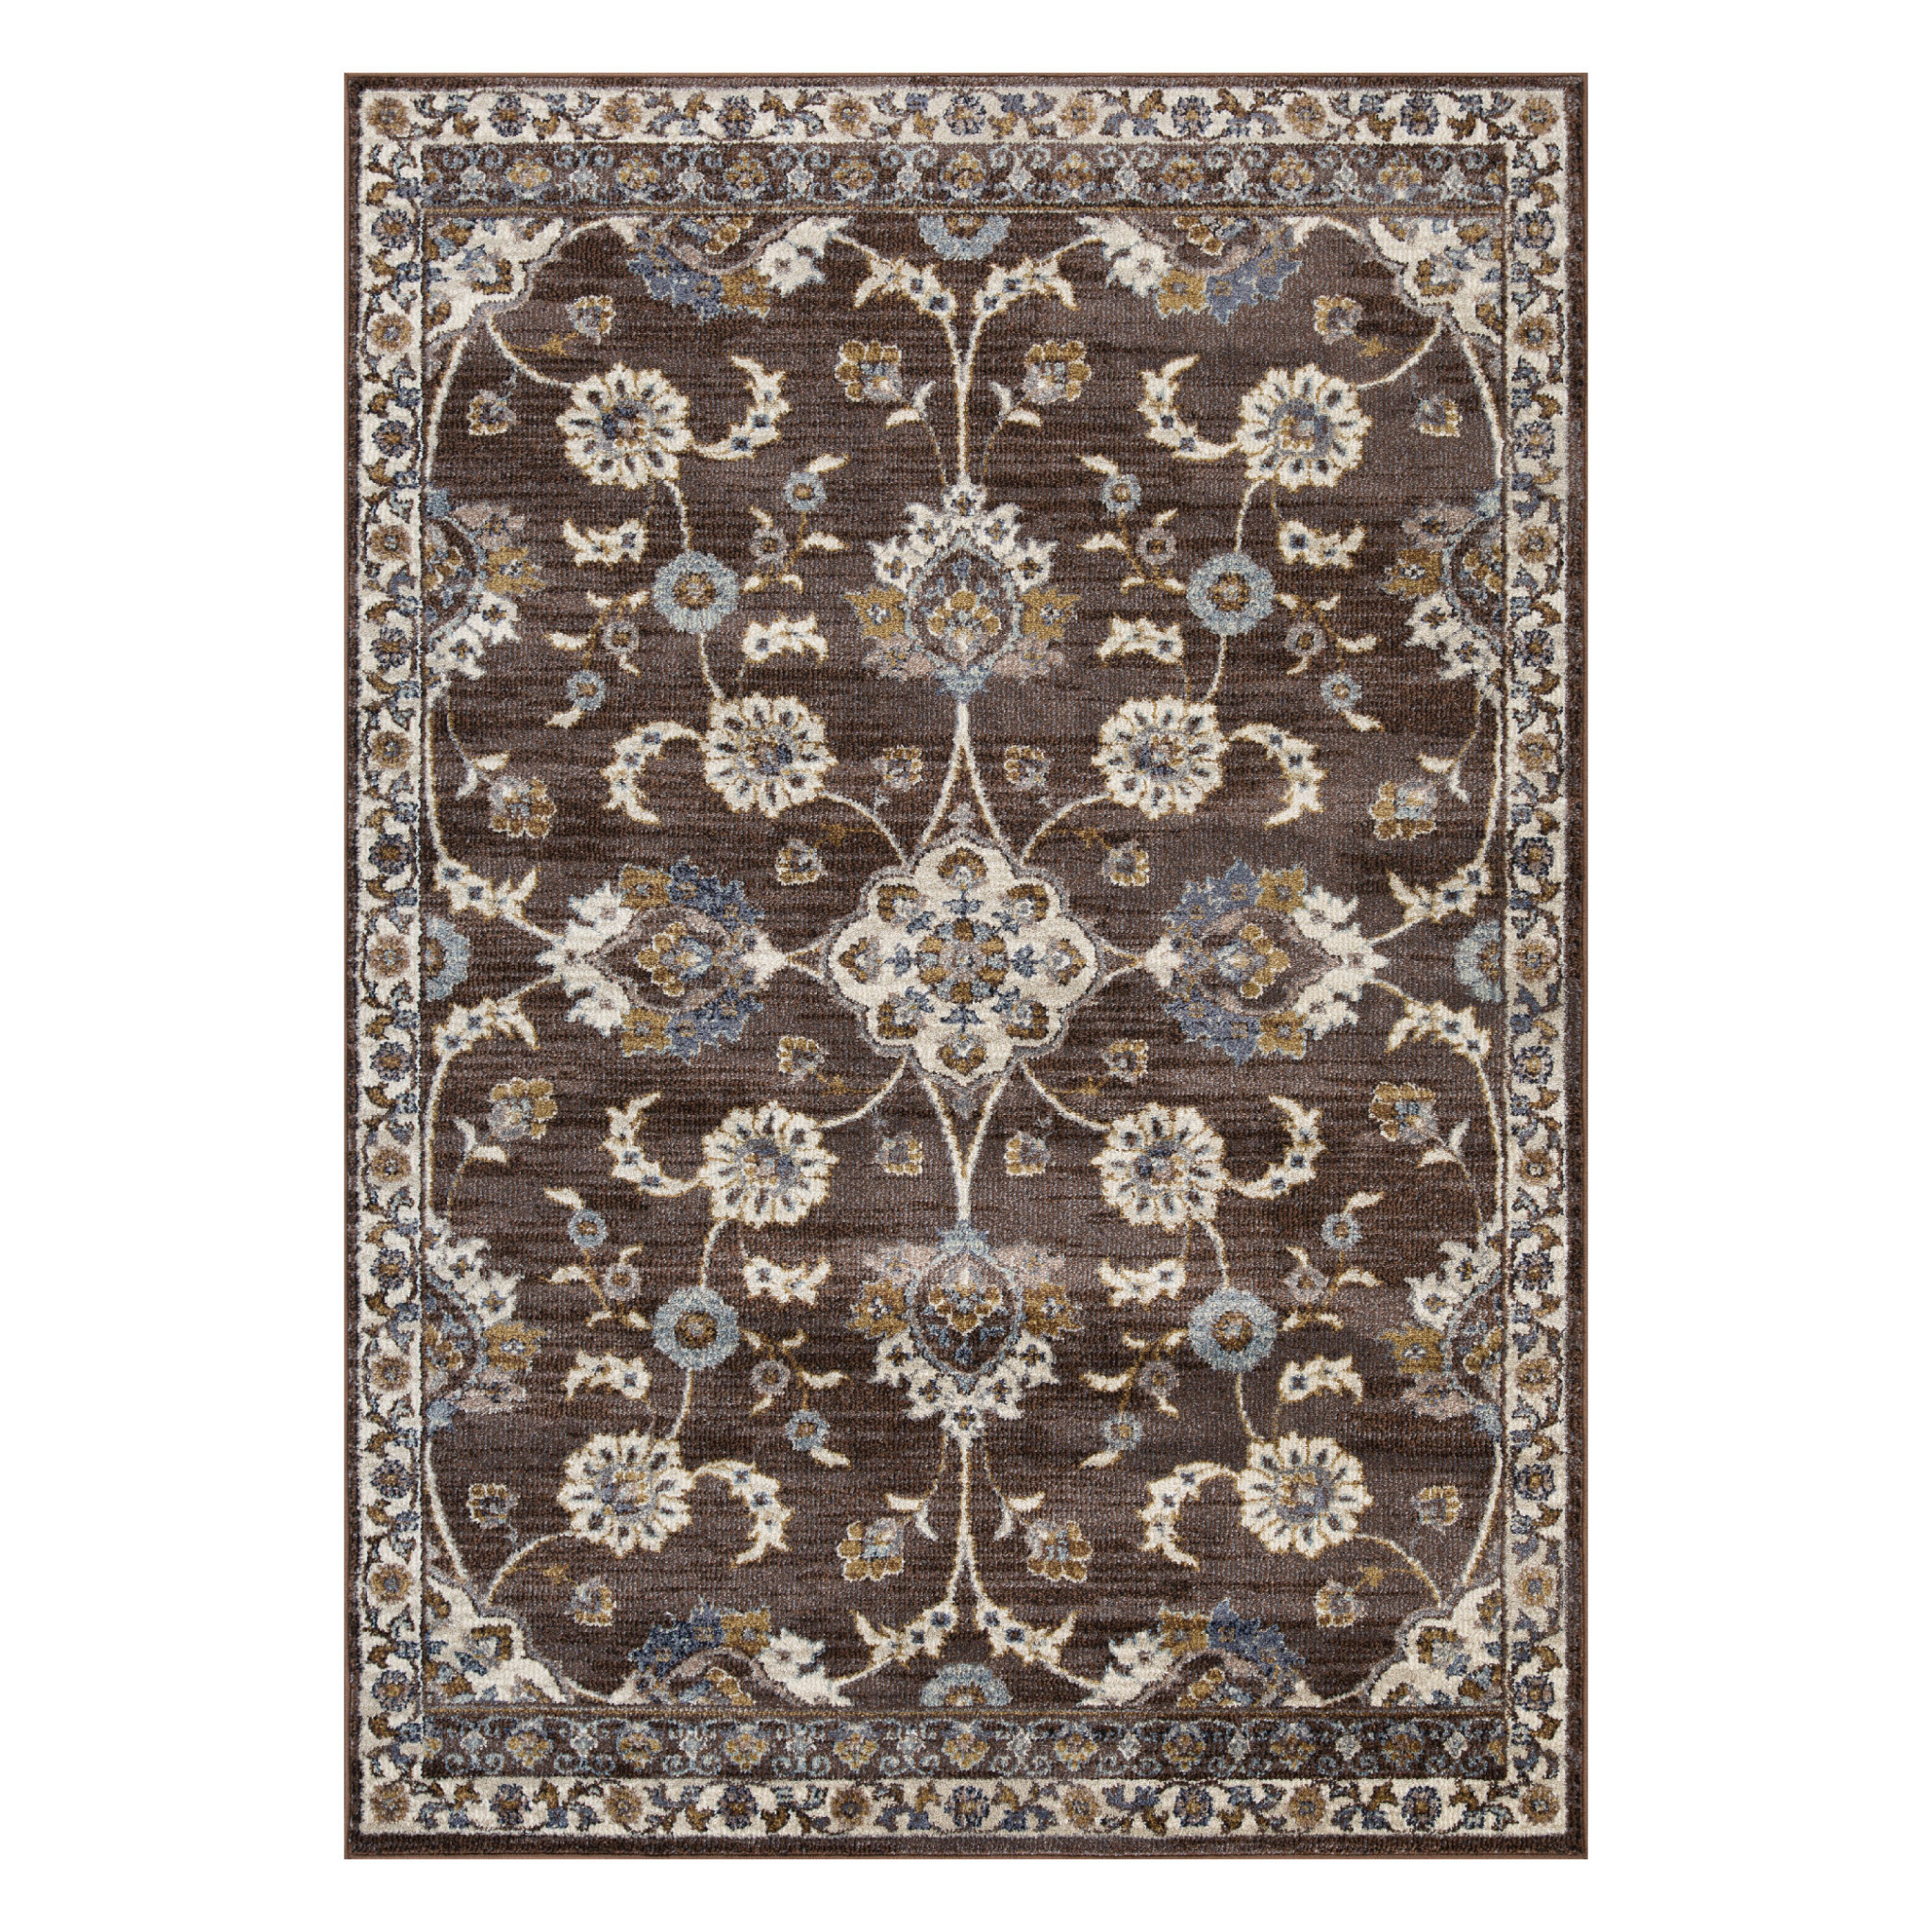 9' x 12' Brown Floral Power Loom Area Rug With Fringe-532152-1